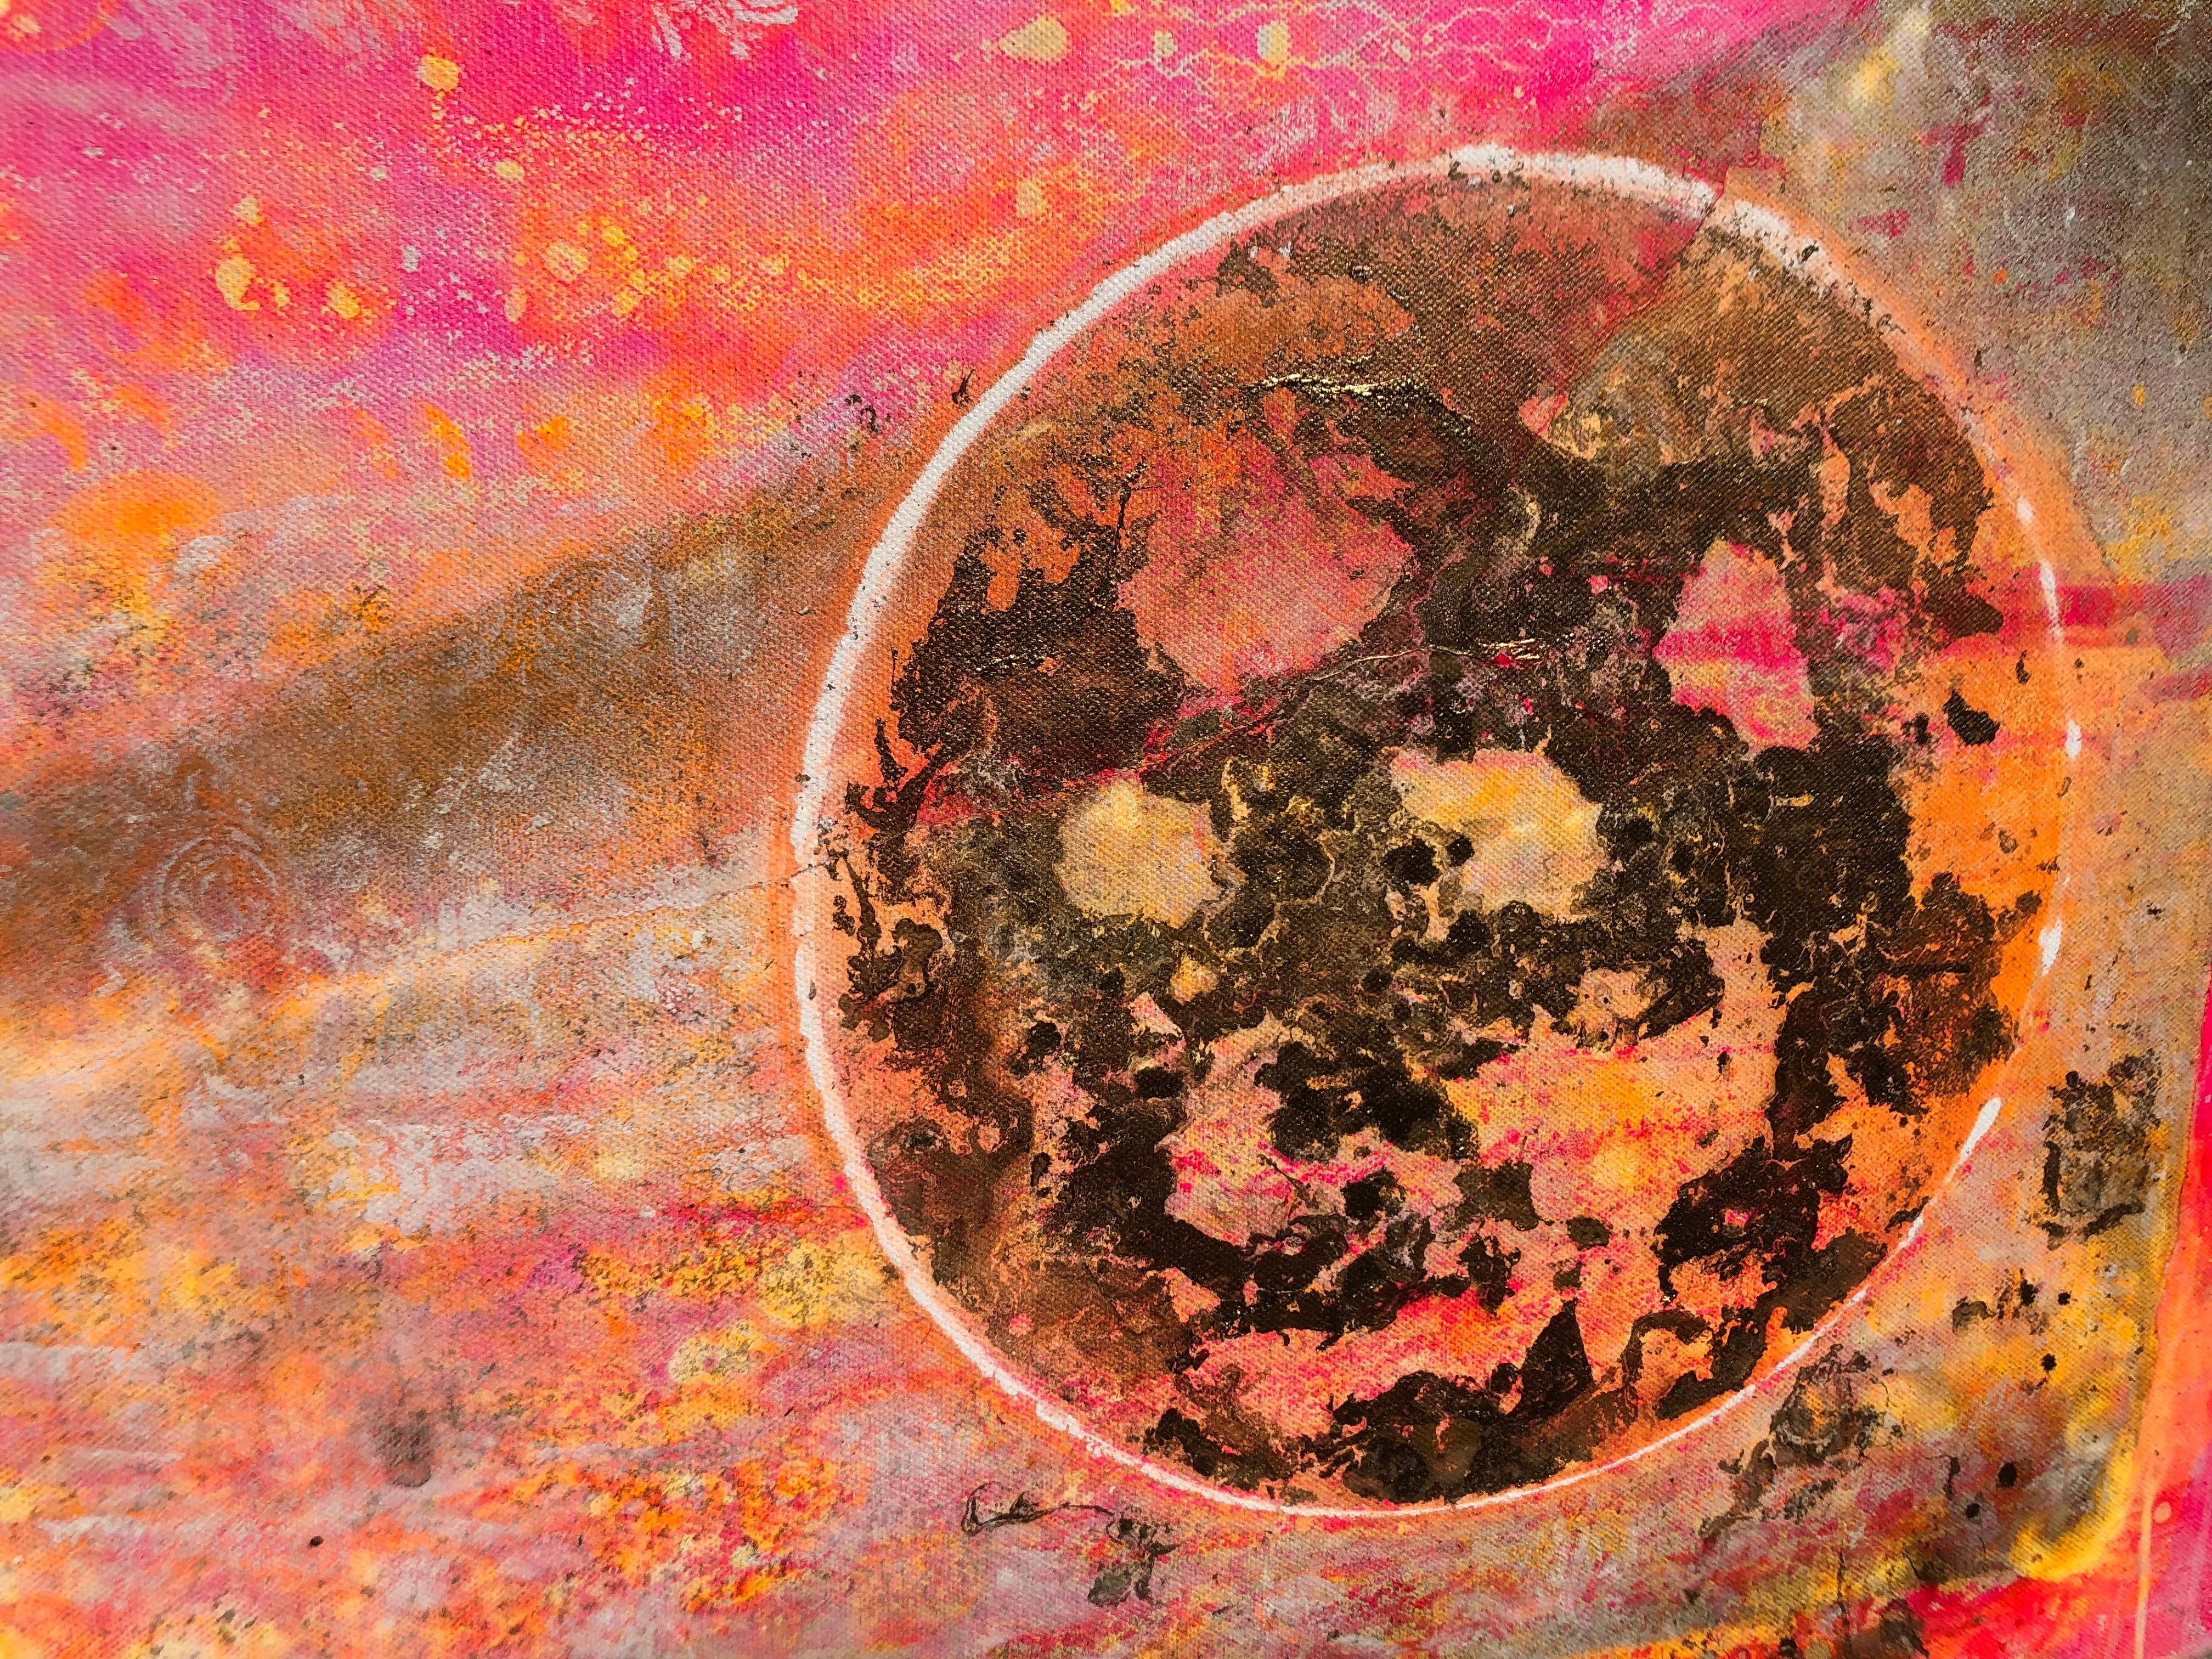 Morning levitation 2 - Painting on canvas, abstract metaphysical, gold, pink im Angebot 1